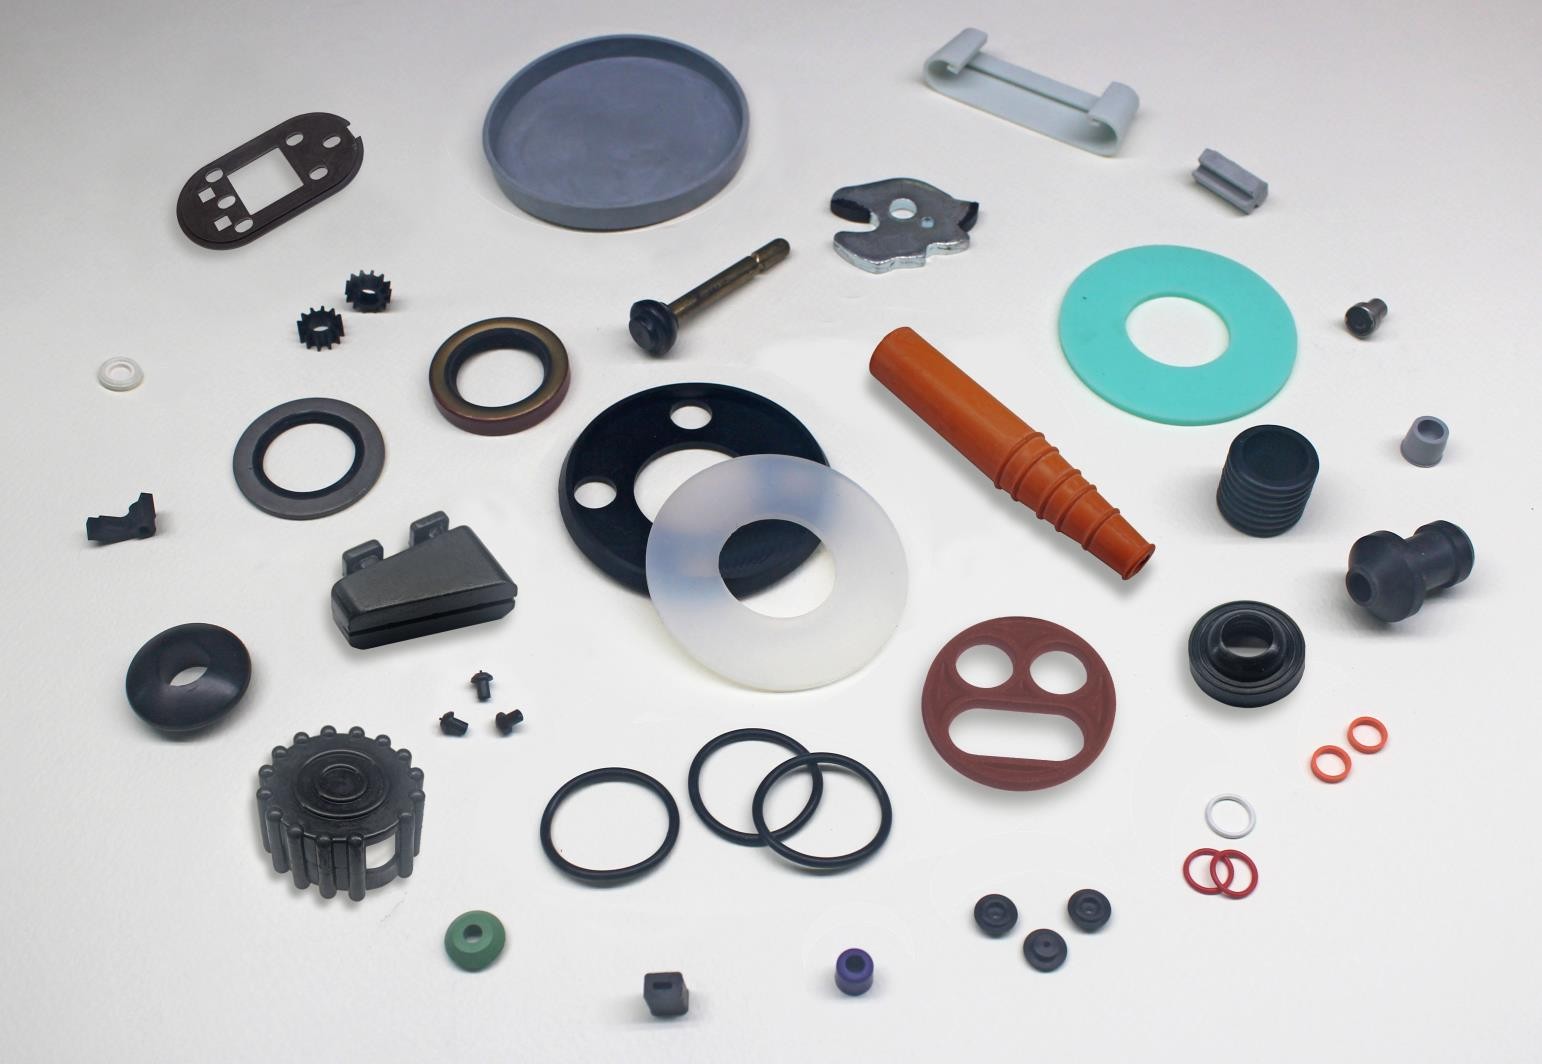 Rubber red special convex specification parts